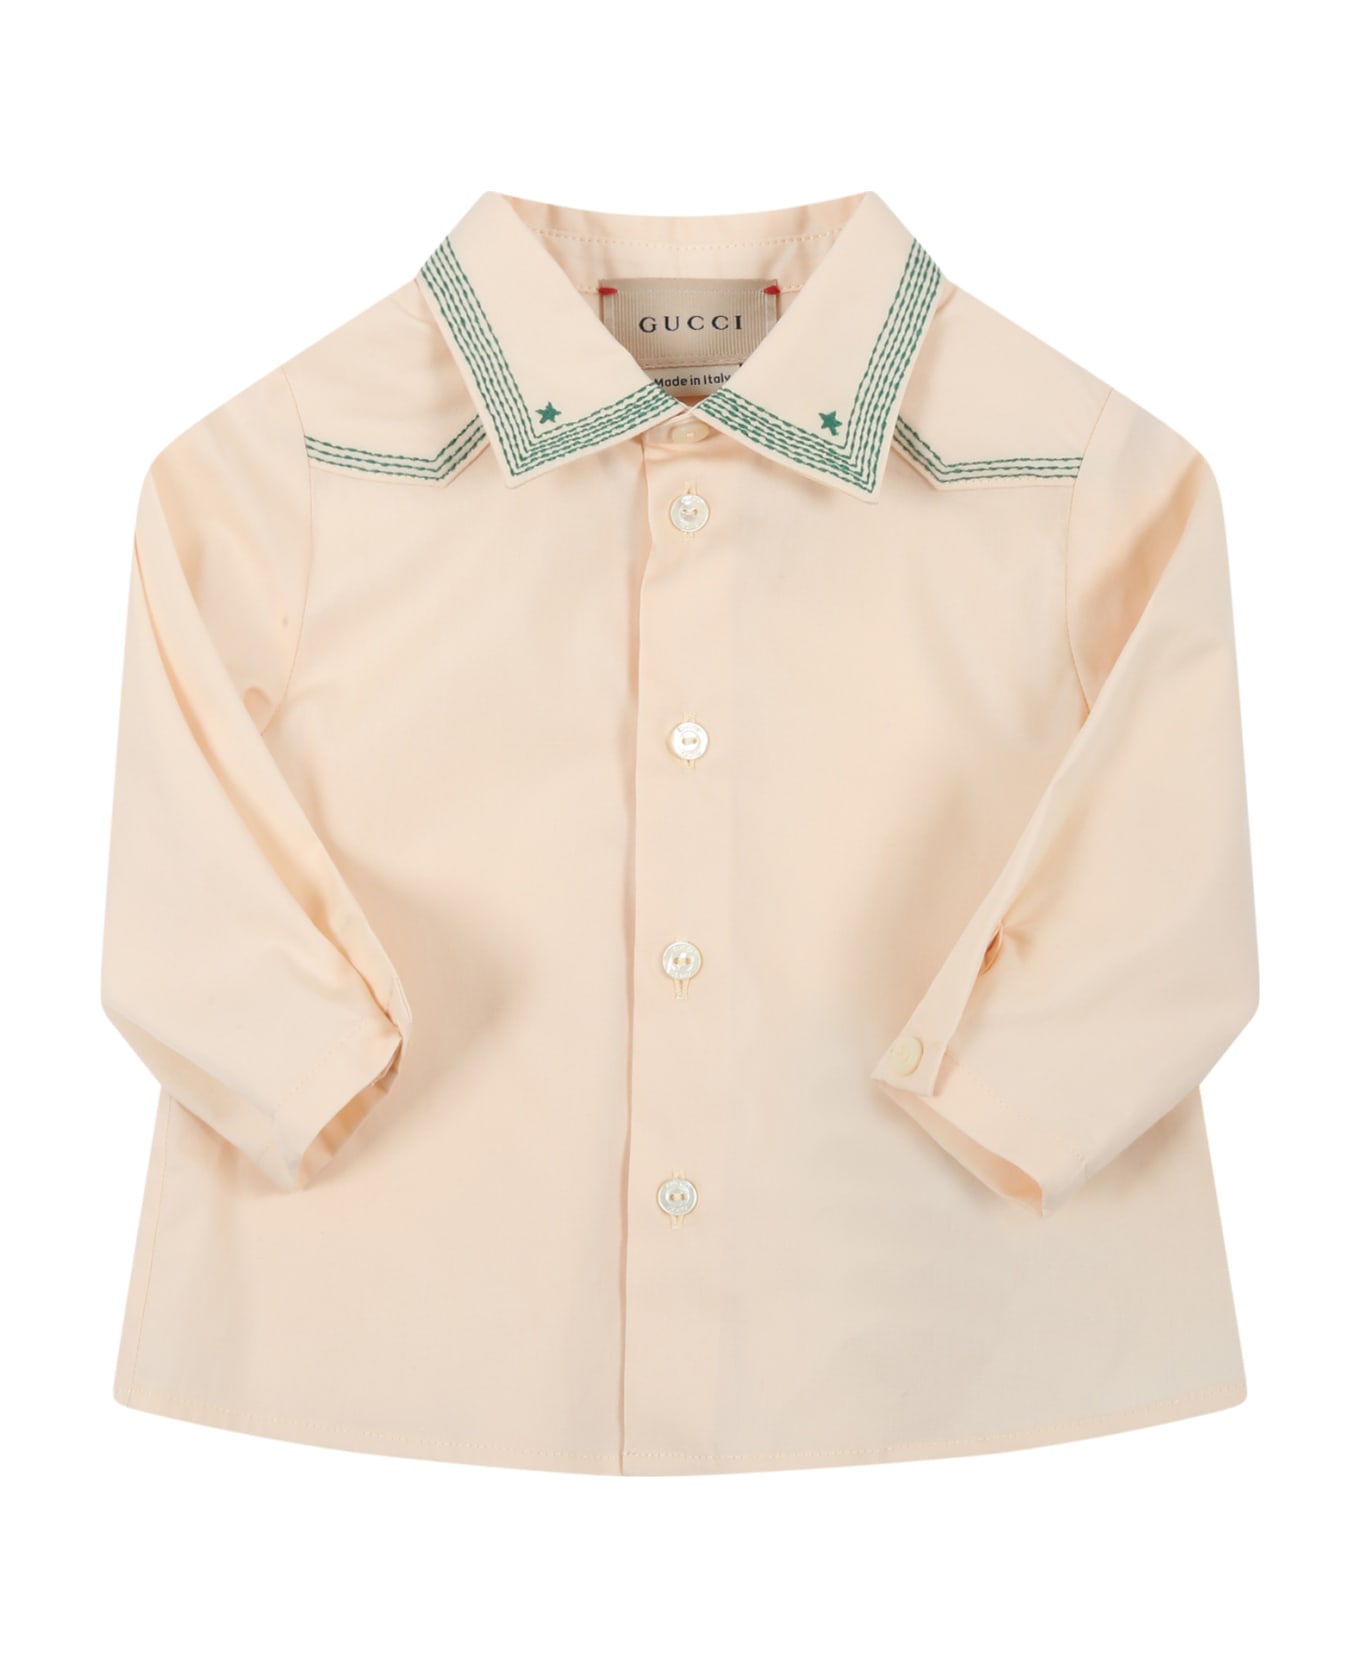 Gucci Ivory Shirt For Baby Boy With Green Double - Ivory